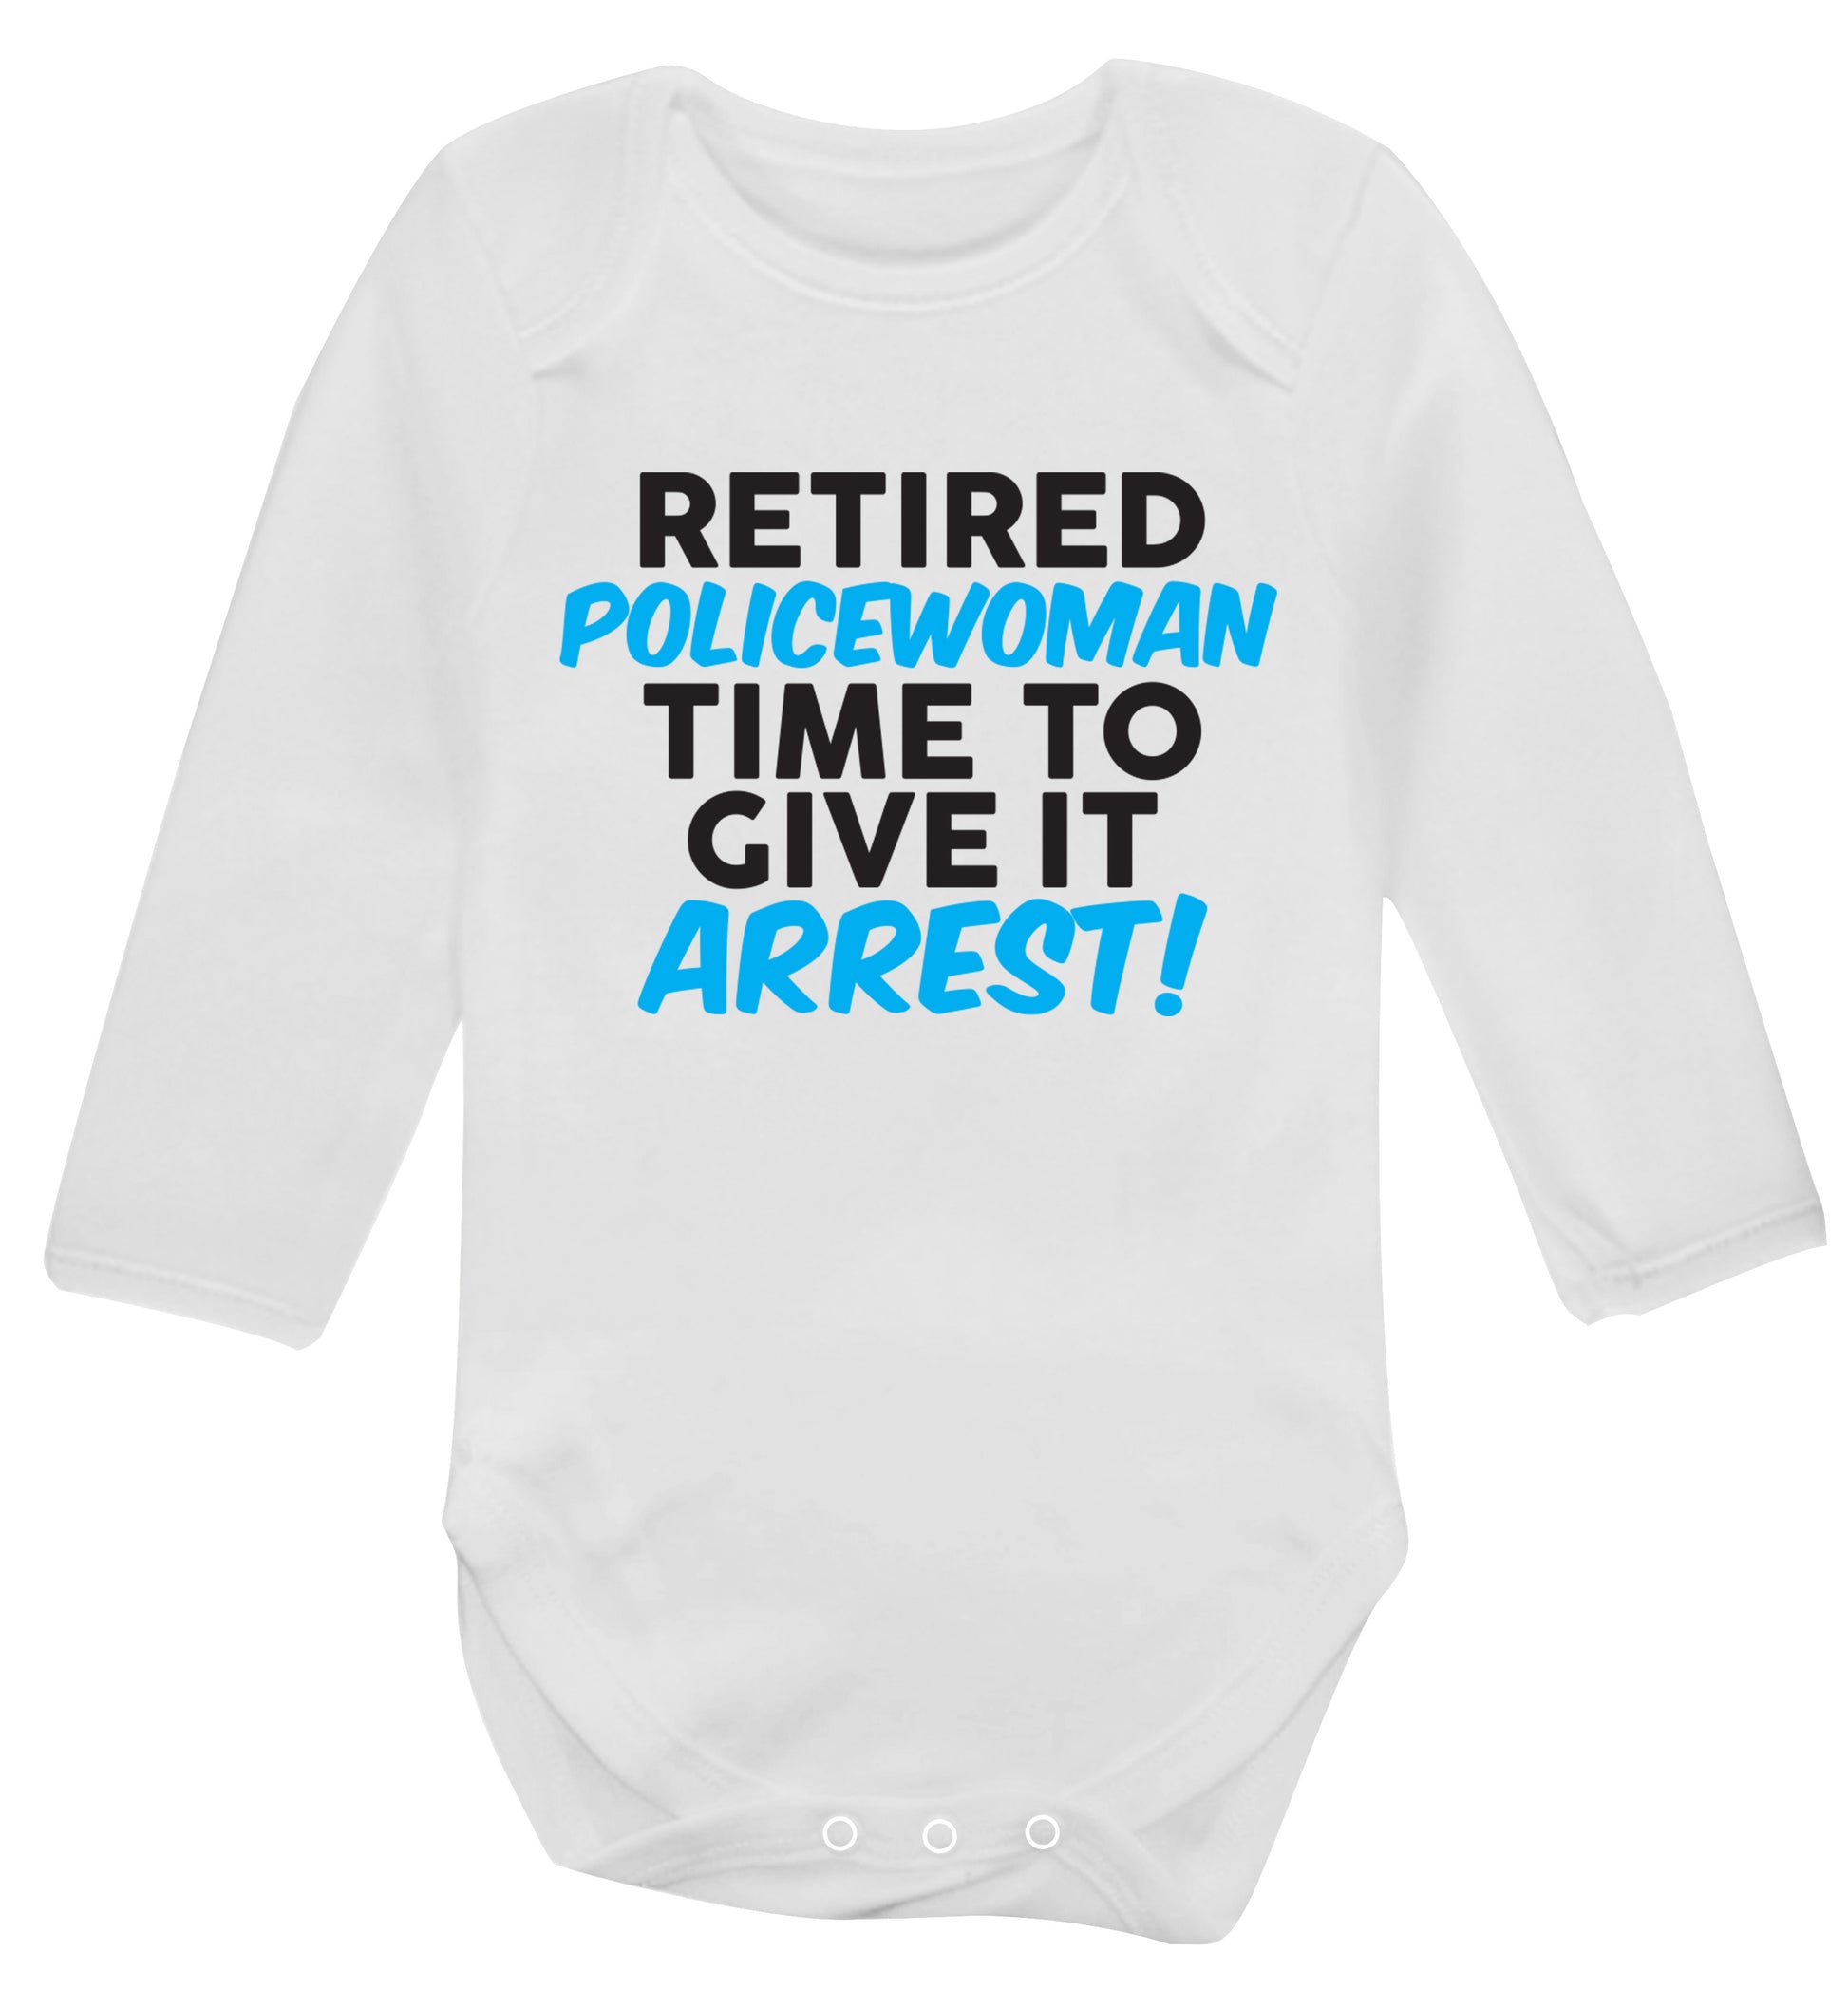 Retired policewoman time to give it arrest Baby Vest long sleeved white 6-12 months